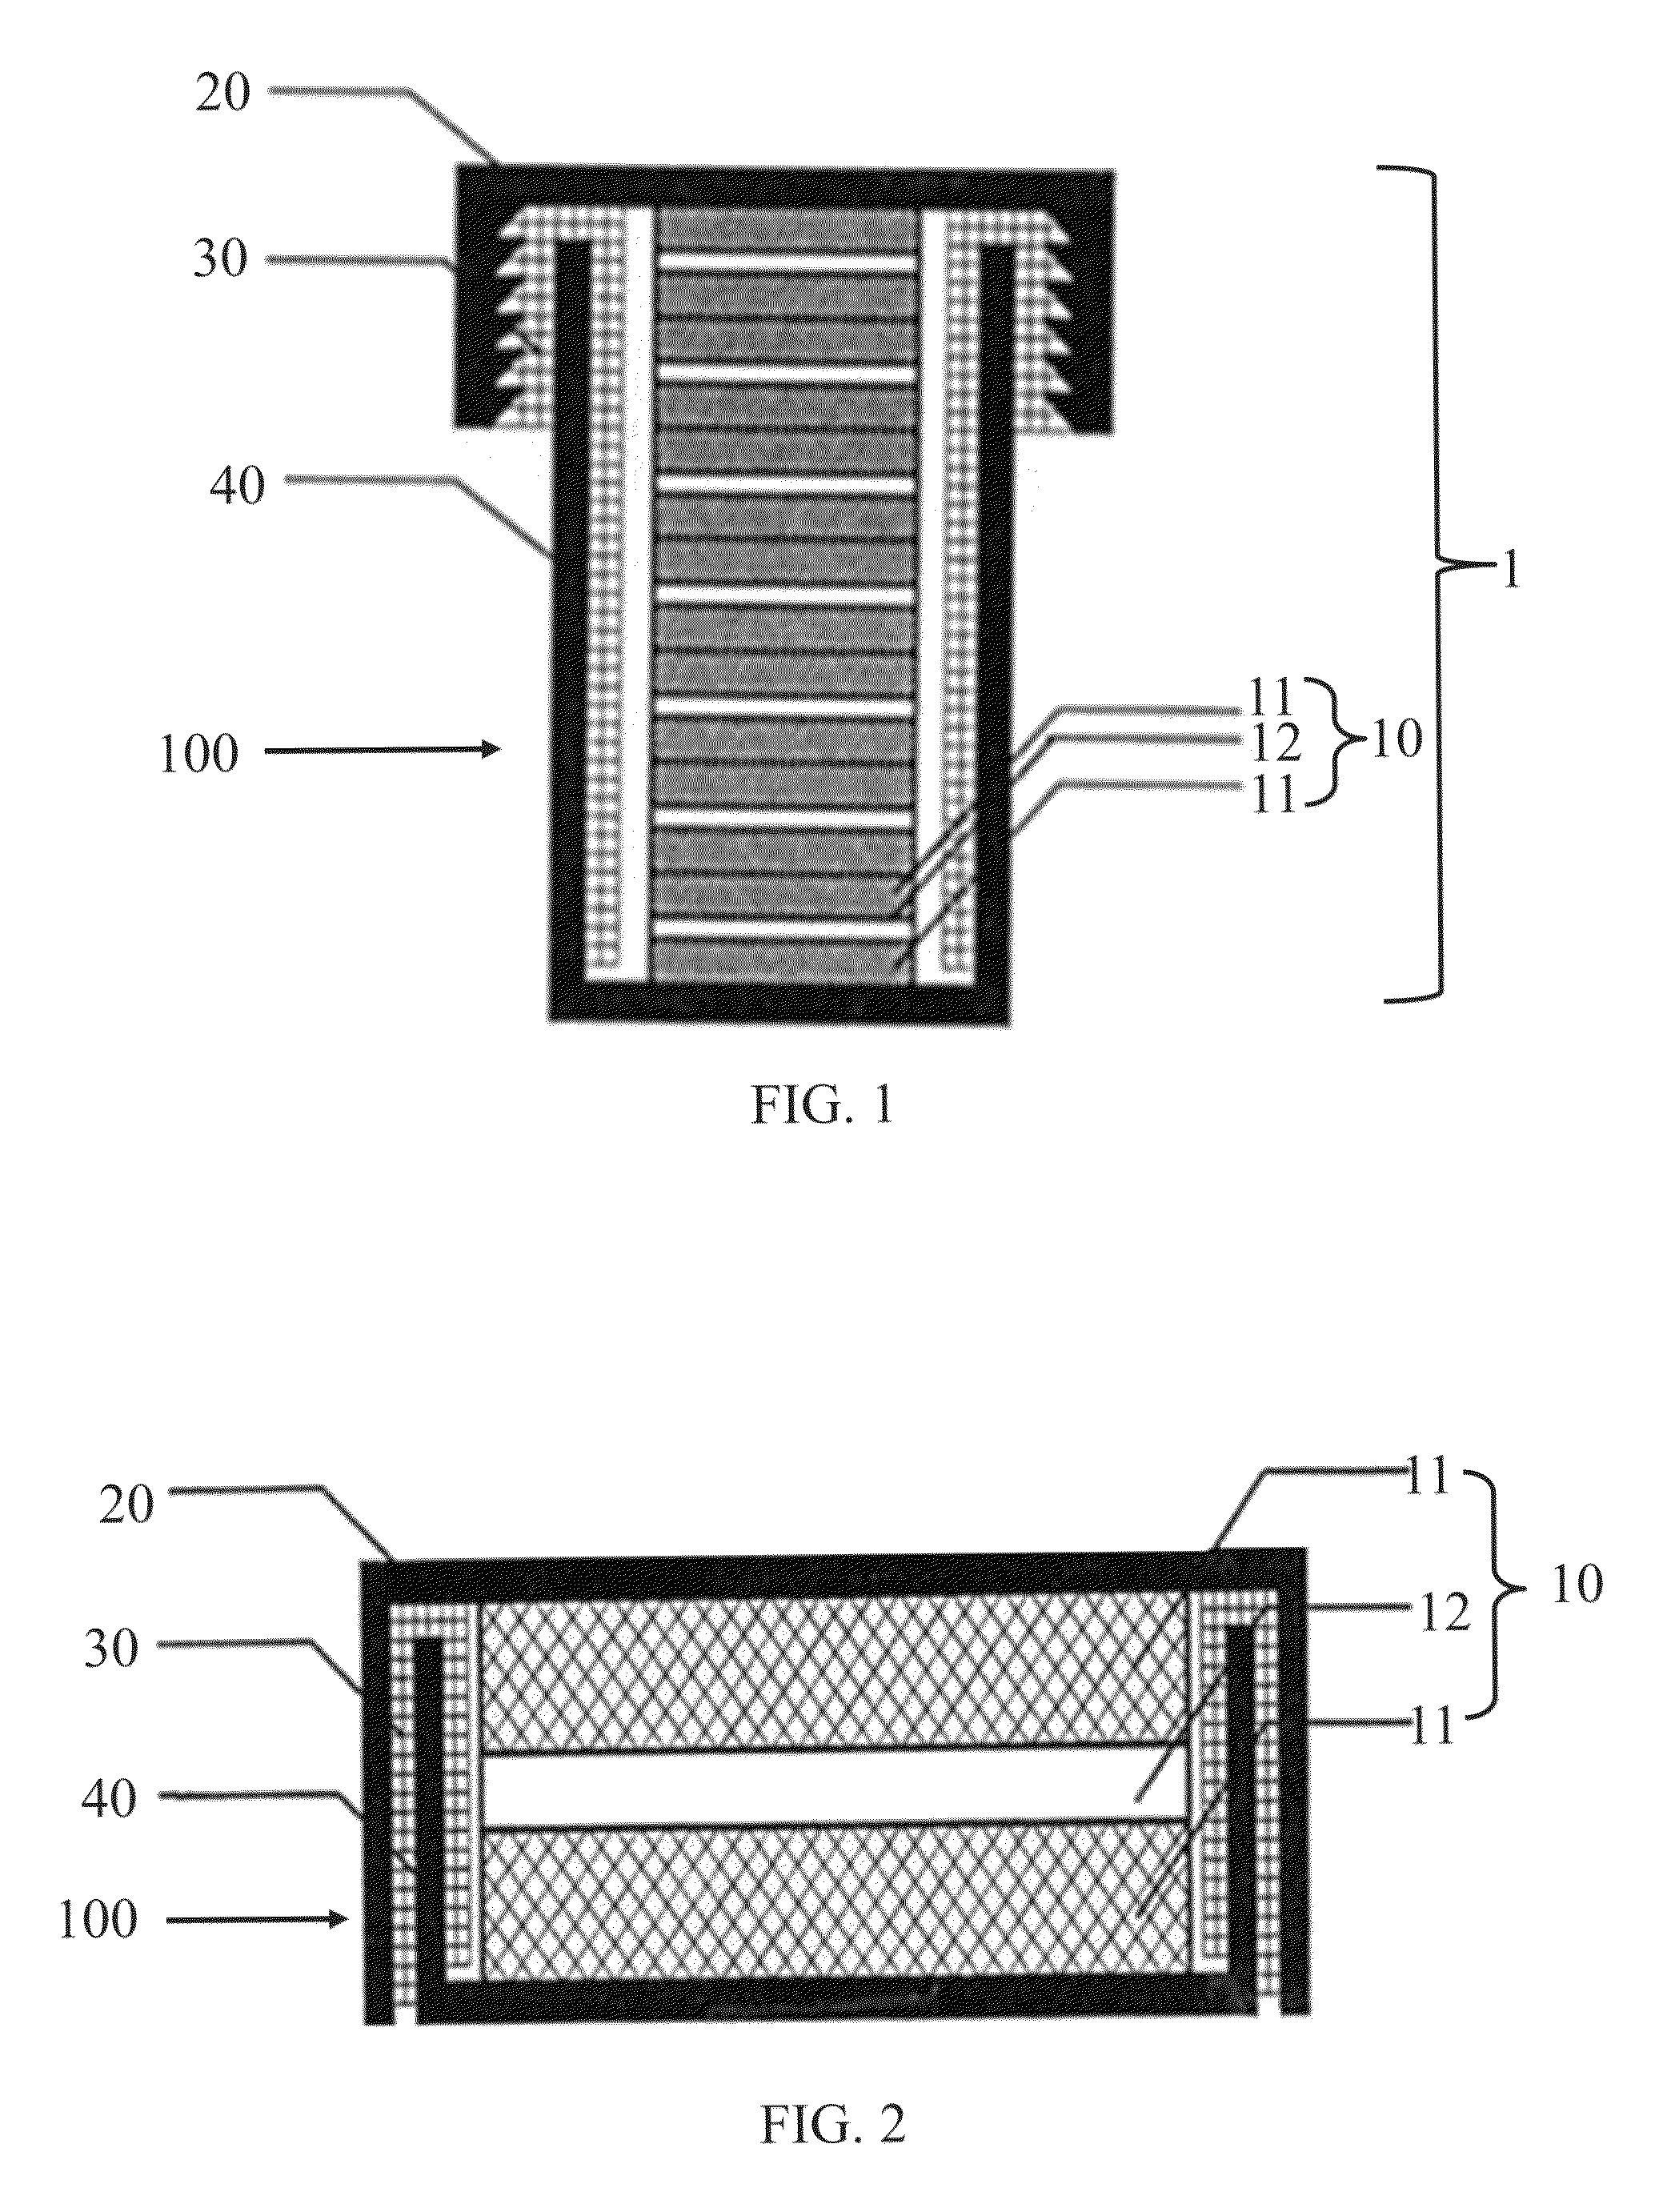 Packaging structures of an energy storage device